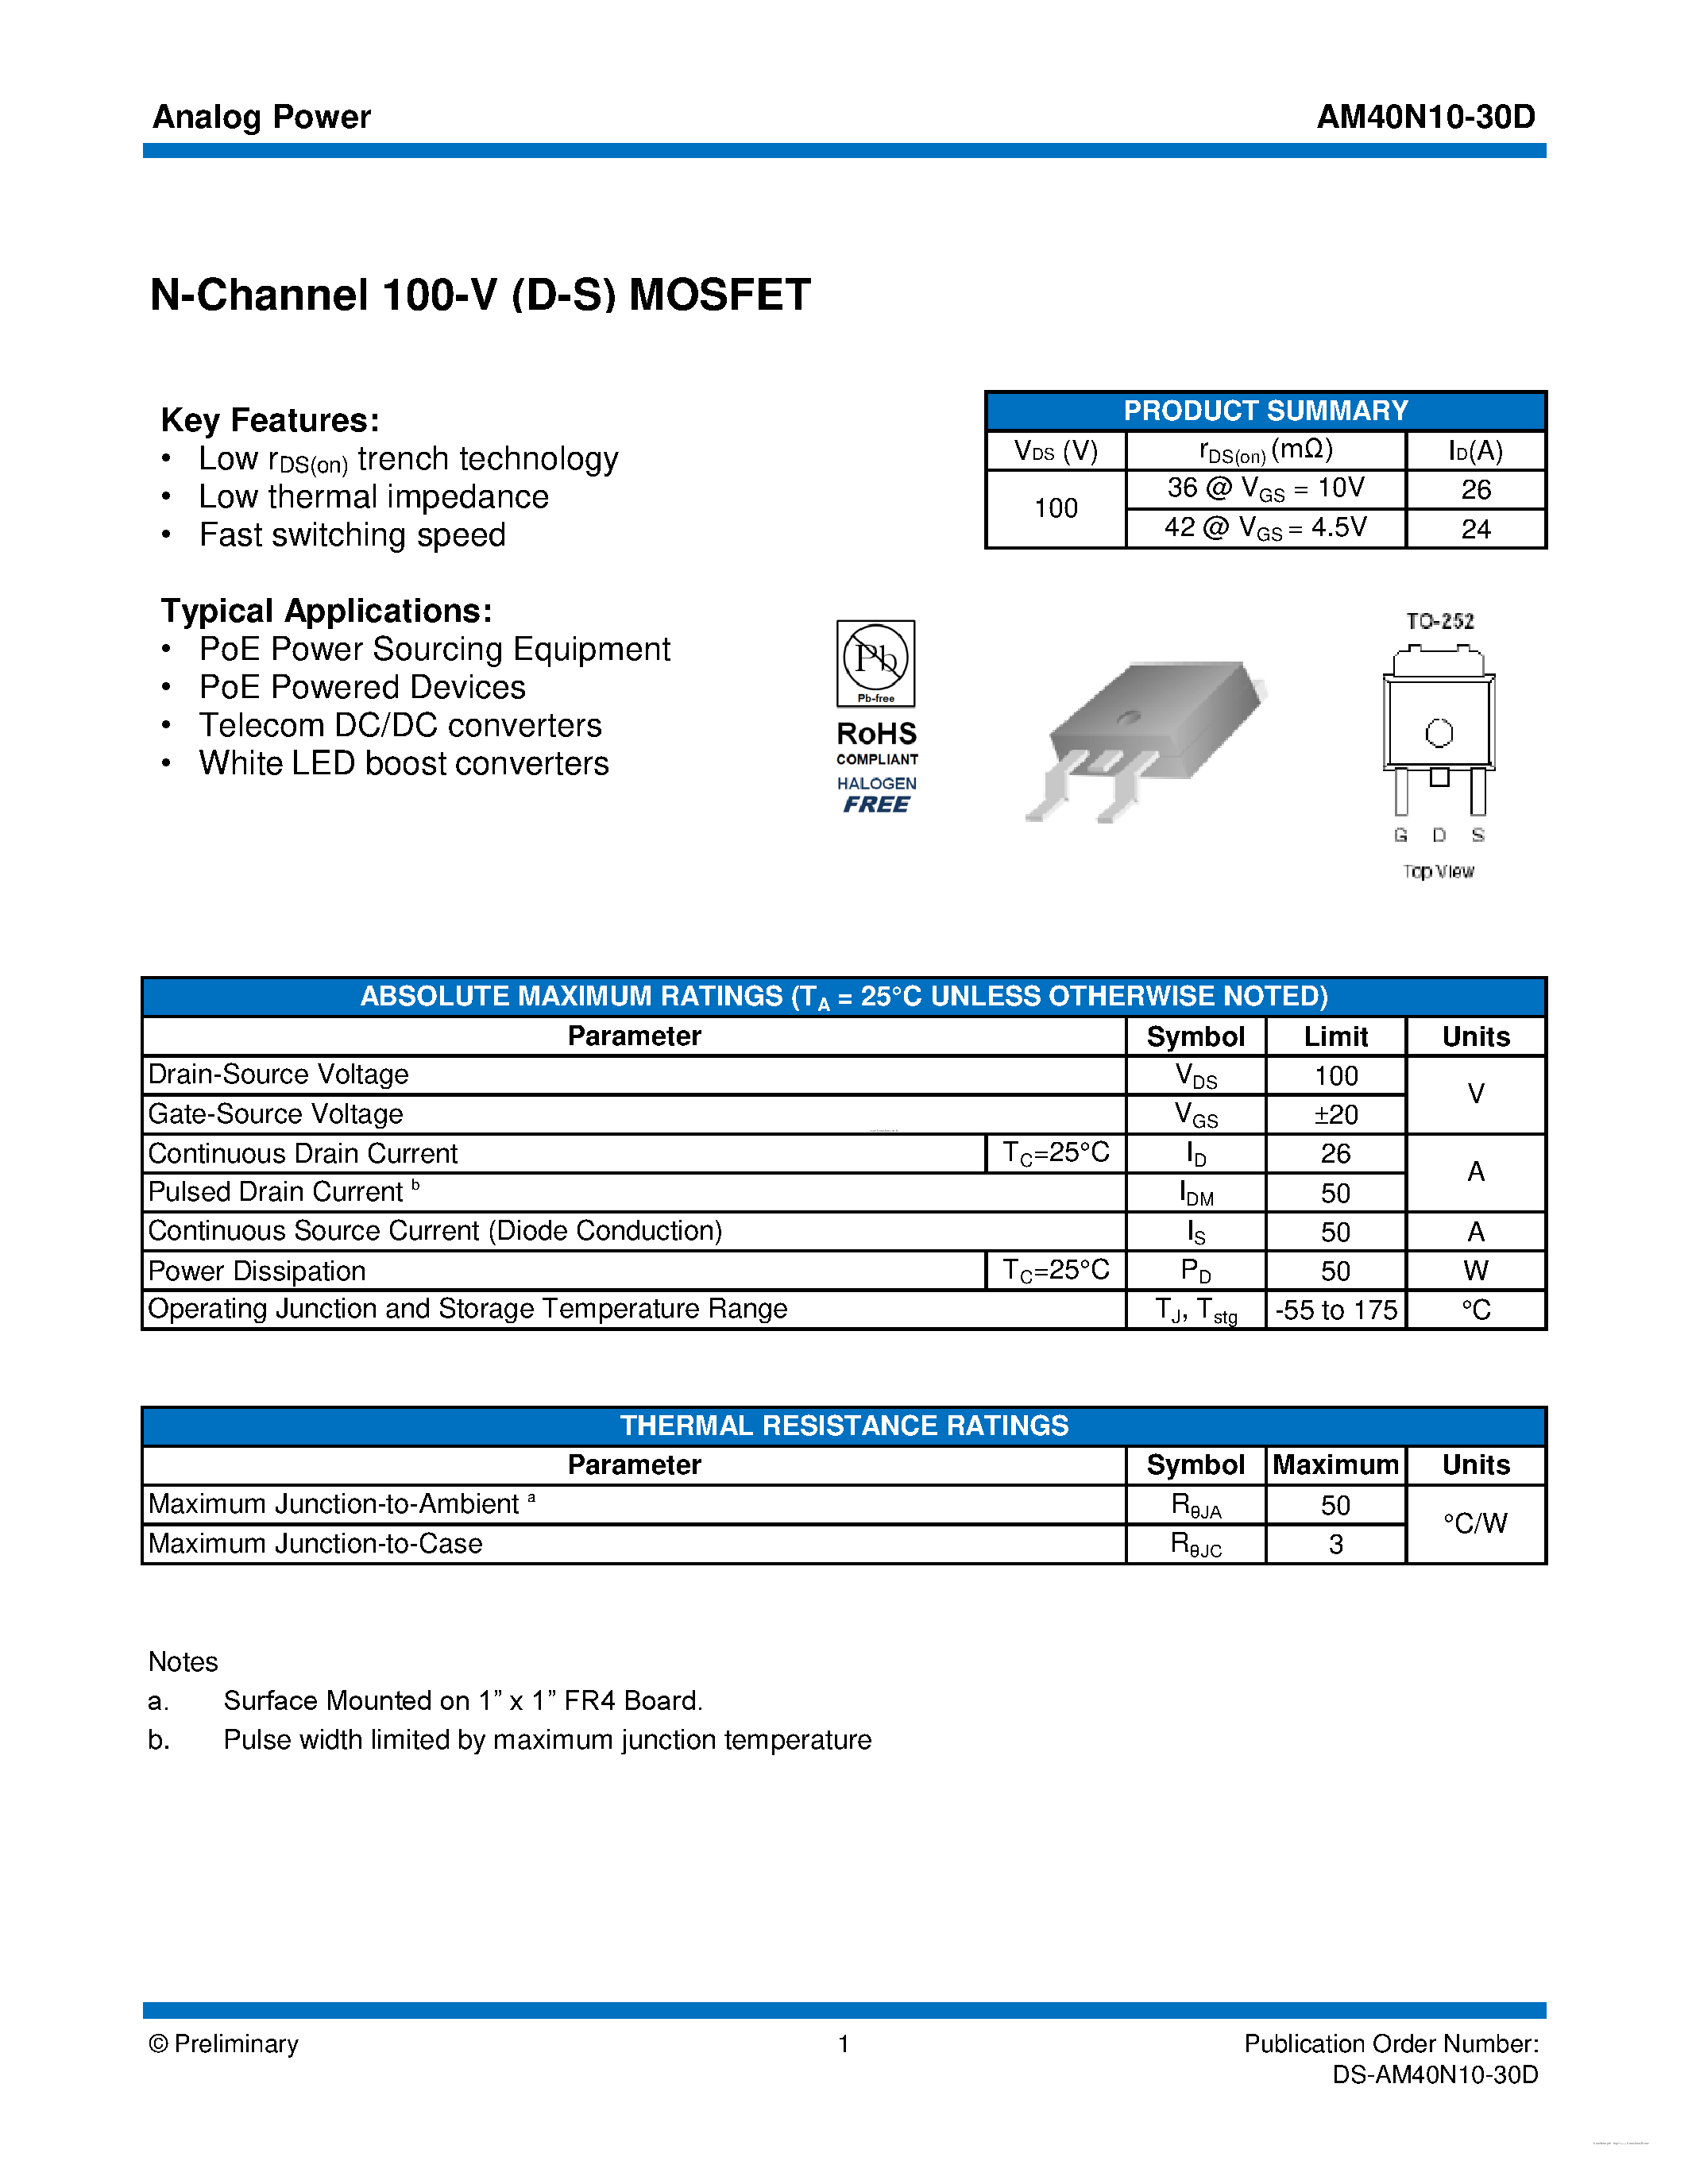 Datasheet AM40N10-30D - MOSFET page 1